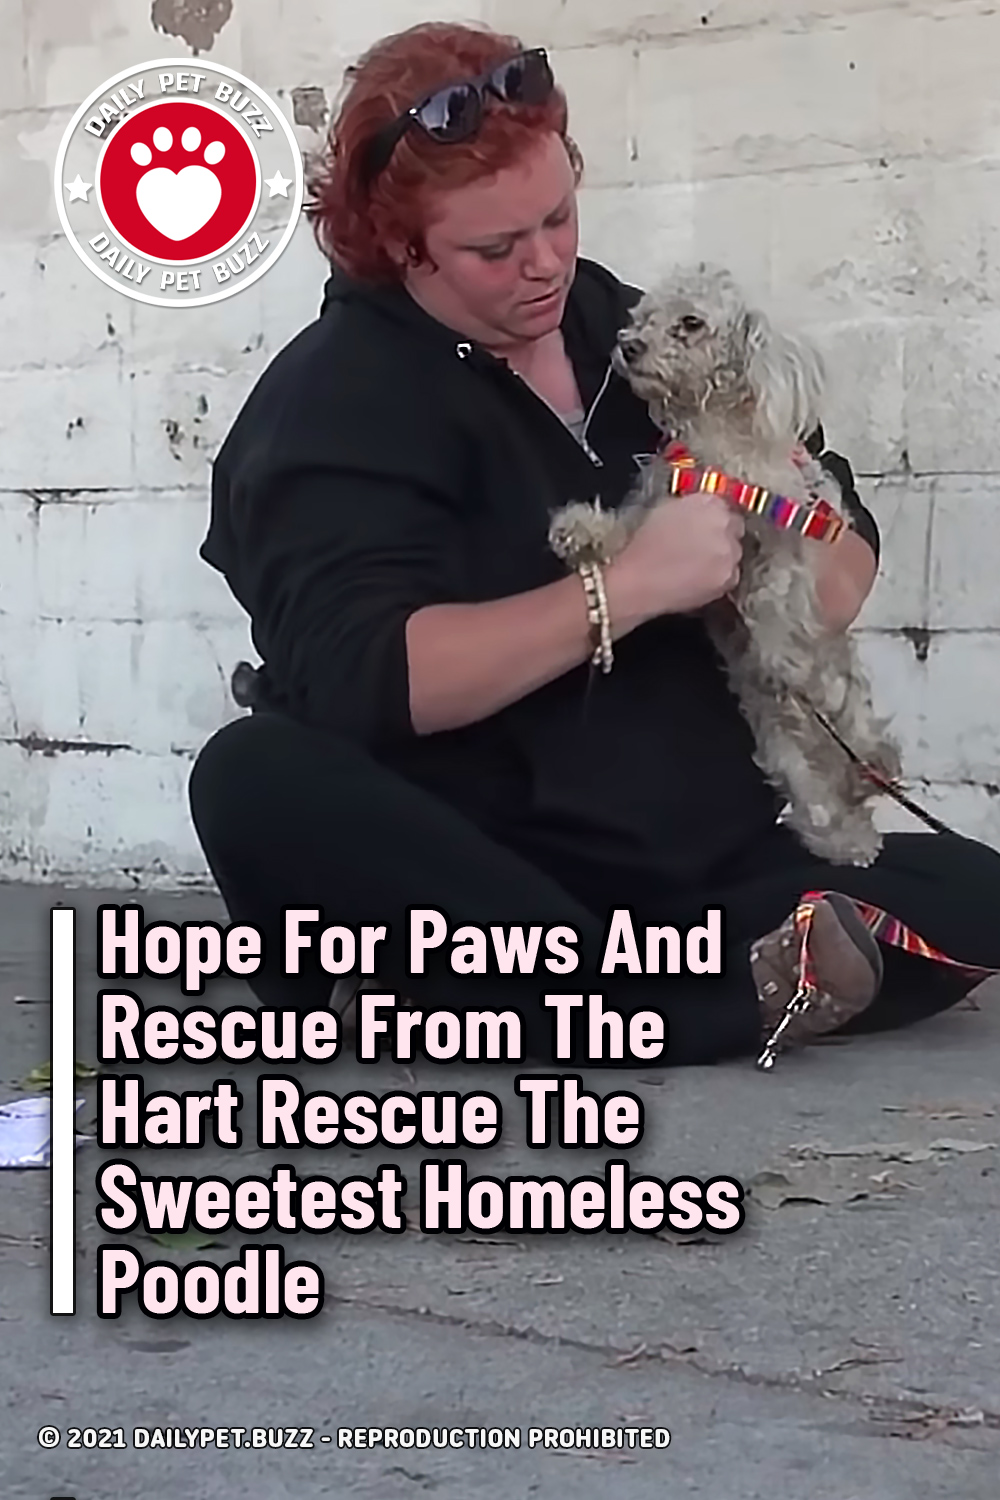 Hope For Paws And Rescue From The Hart Rescue The Sweetest Homeless Poodle